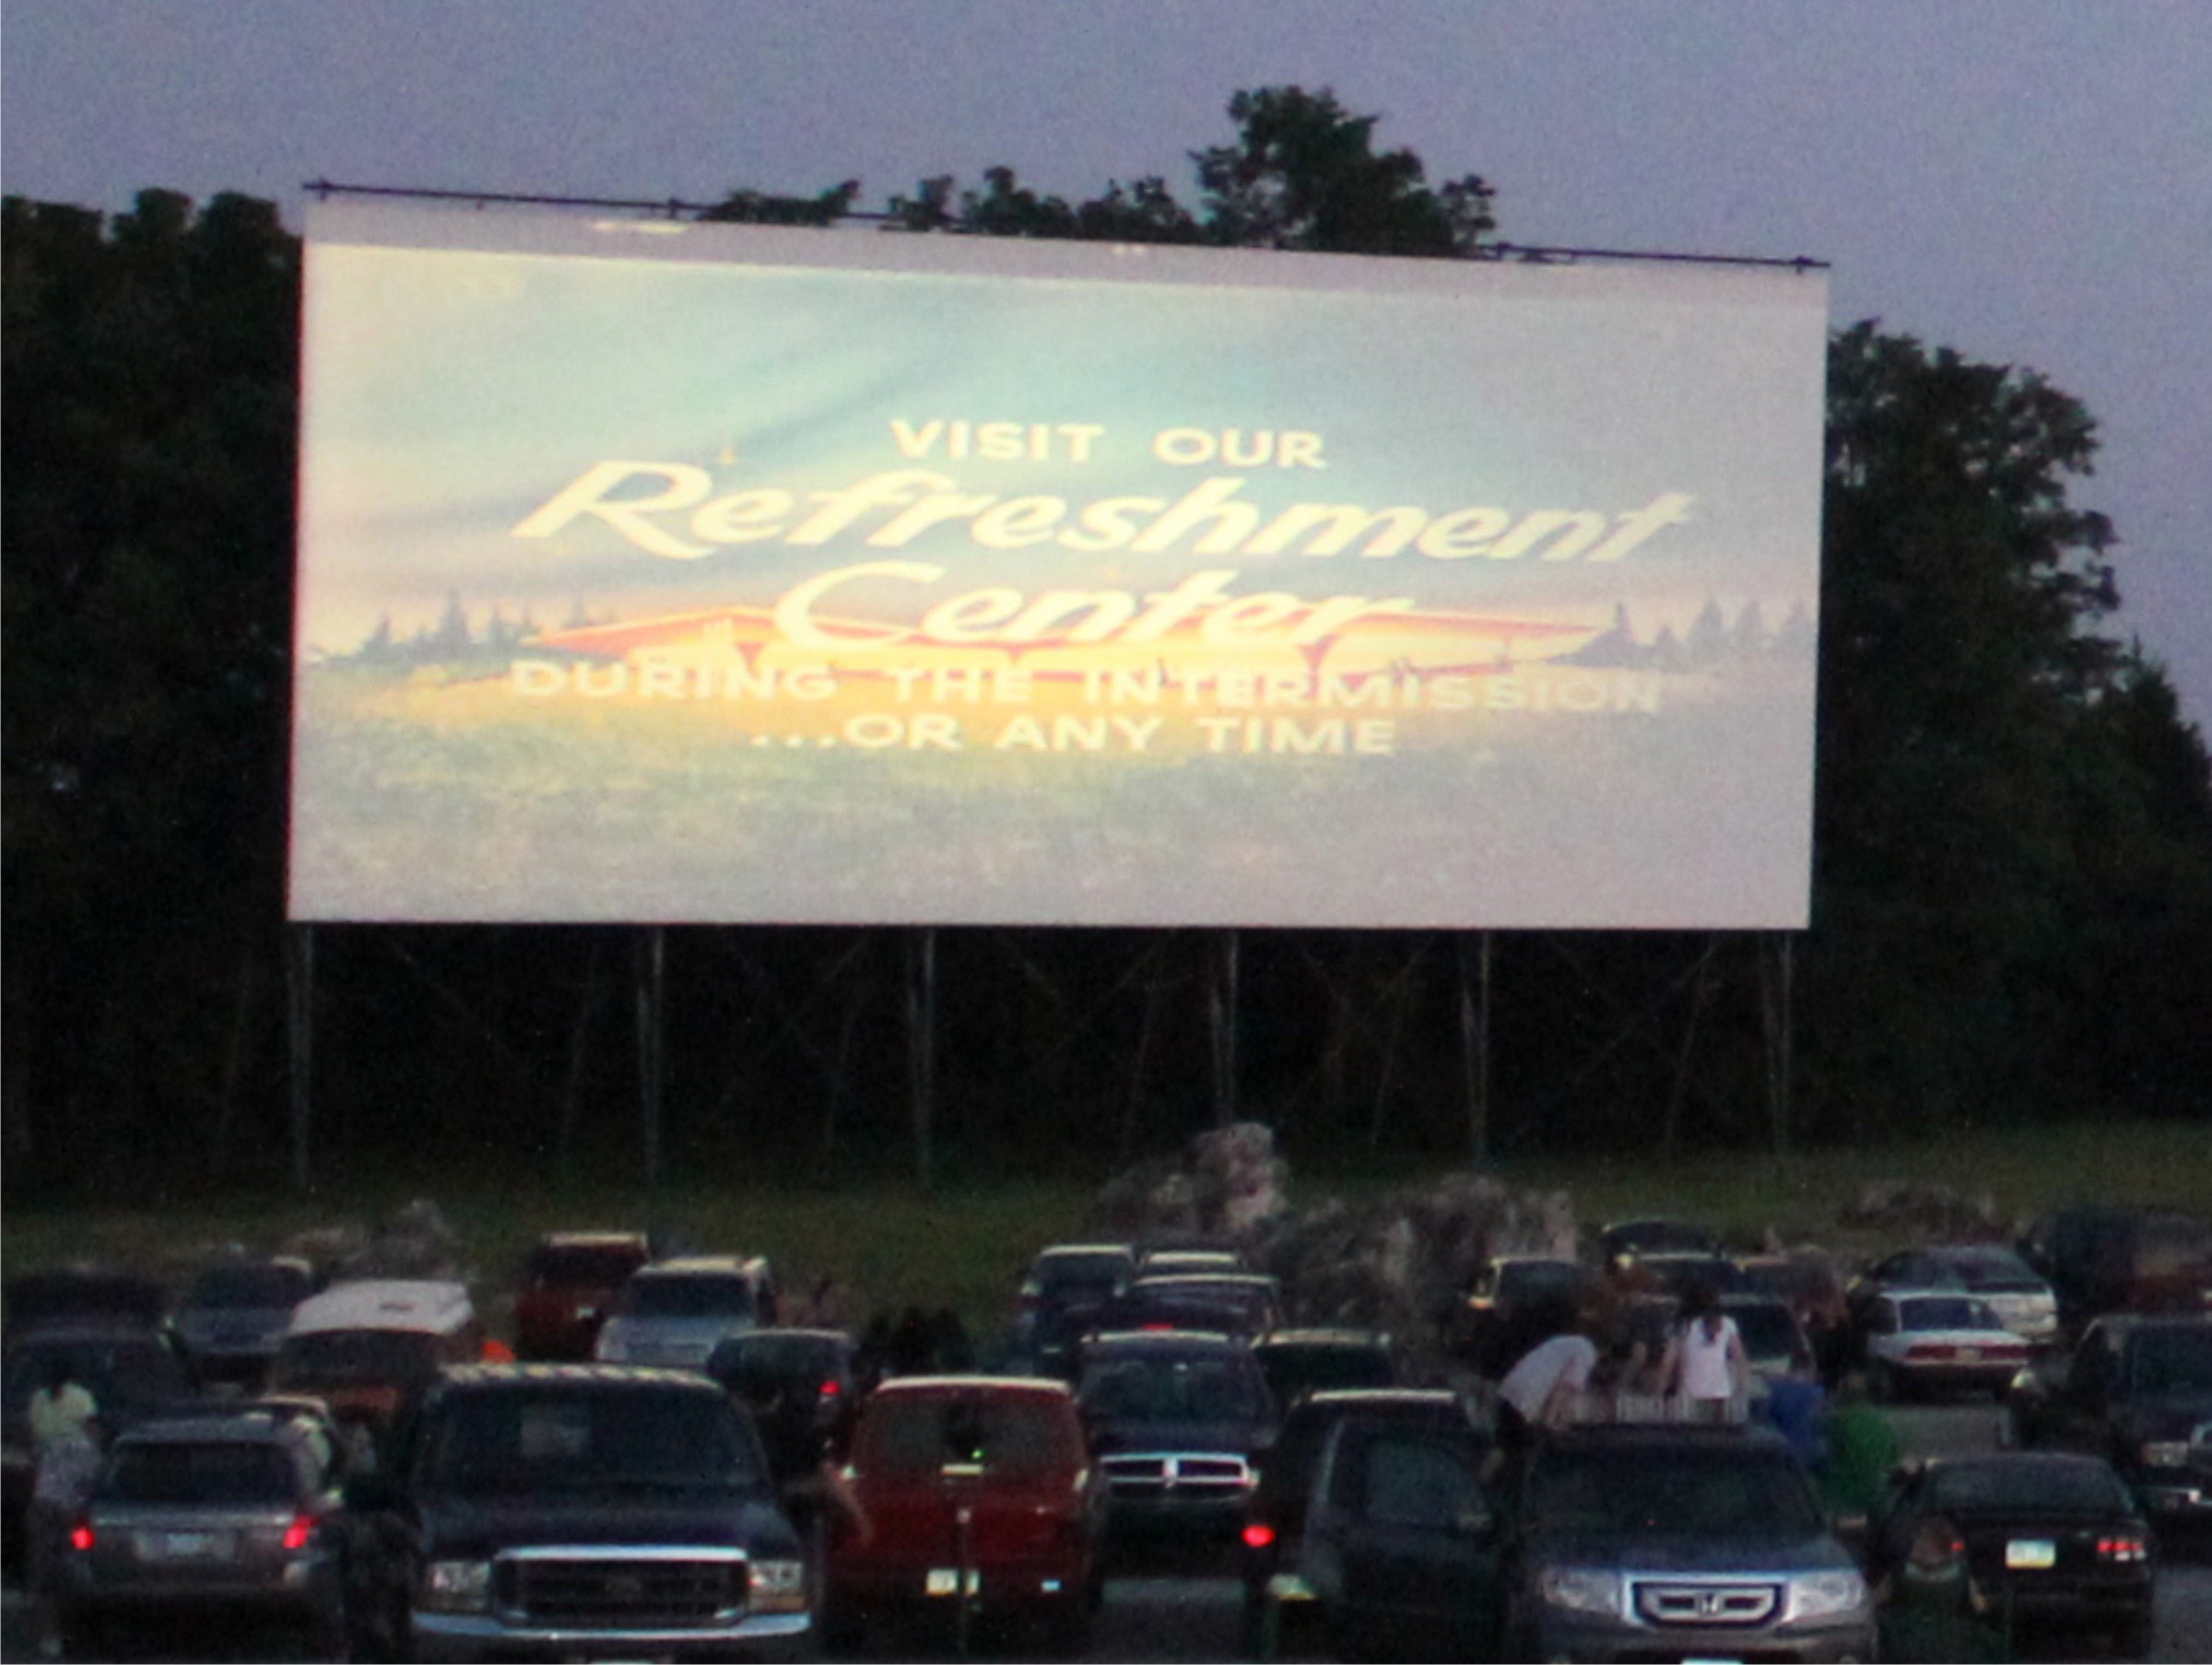 Keep Grandkids Entertained With DIY Drive-In Theater